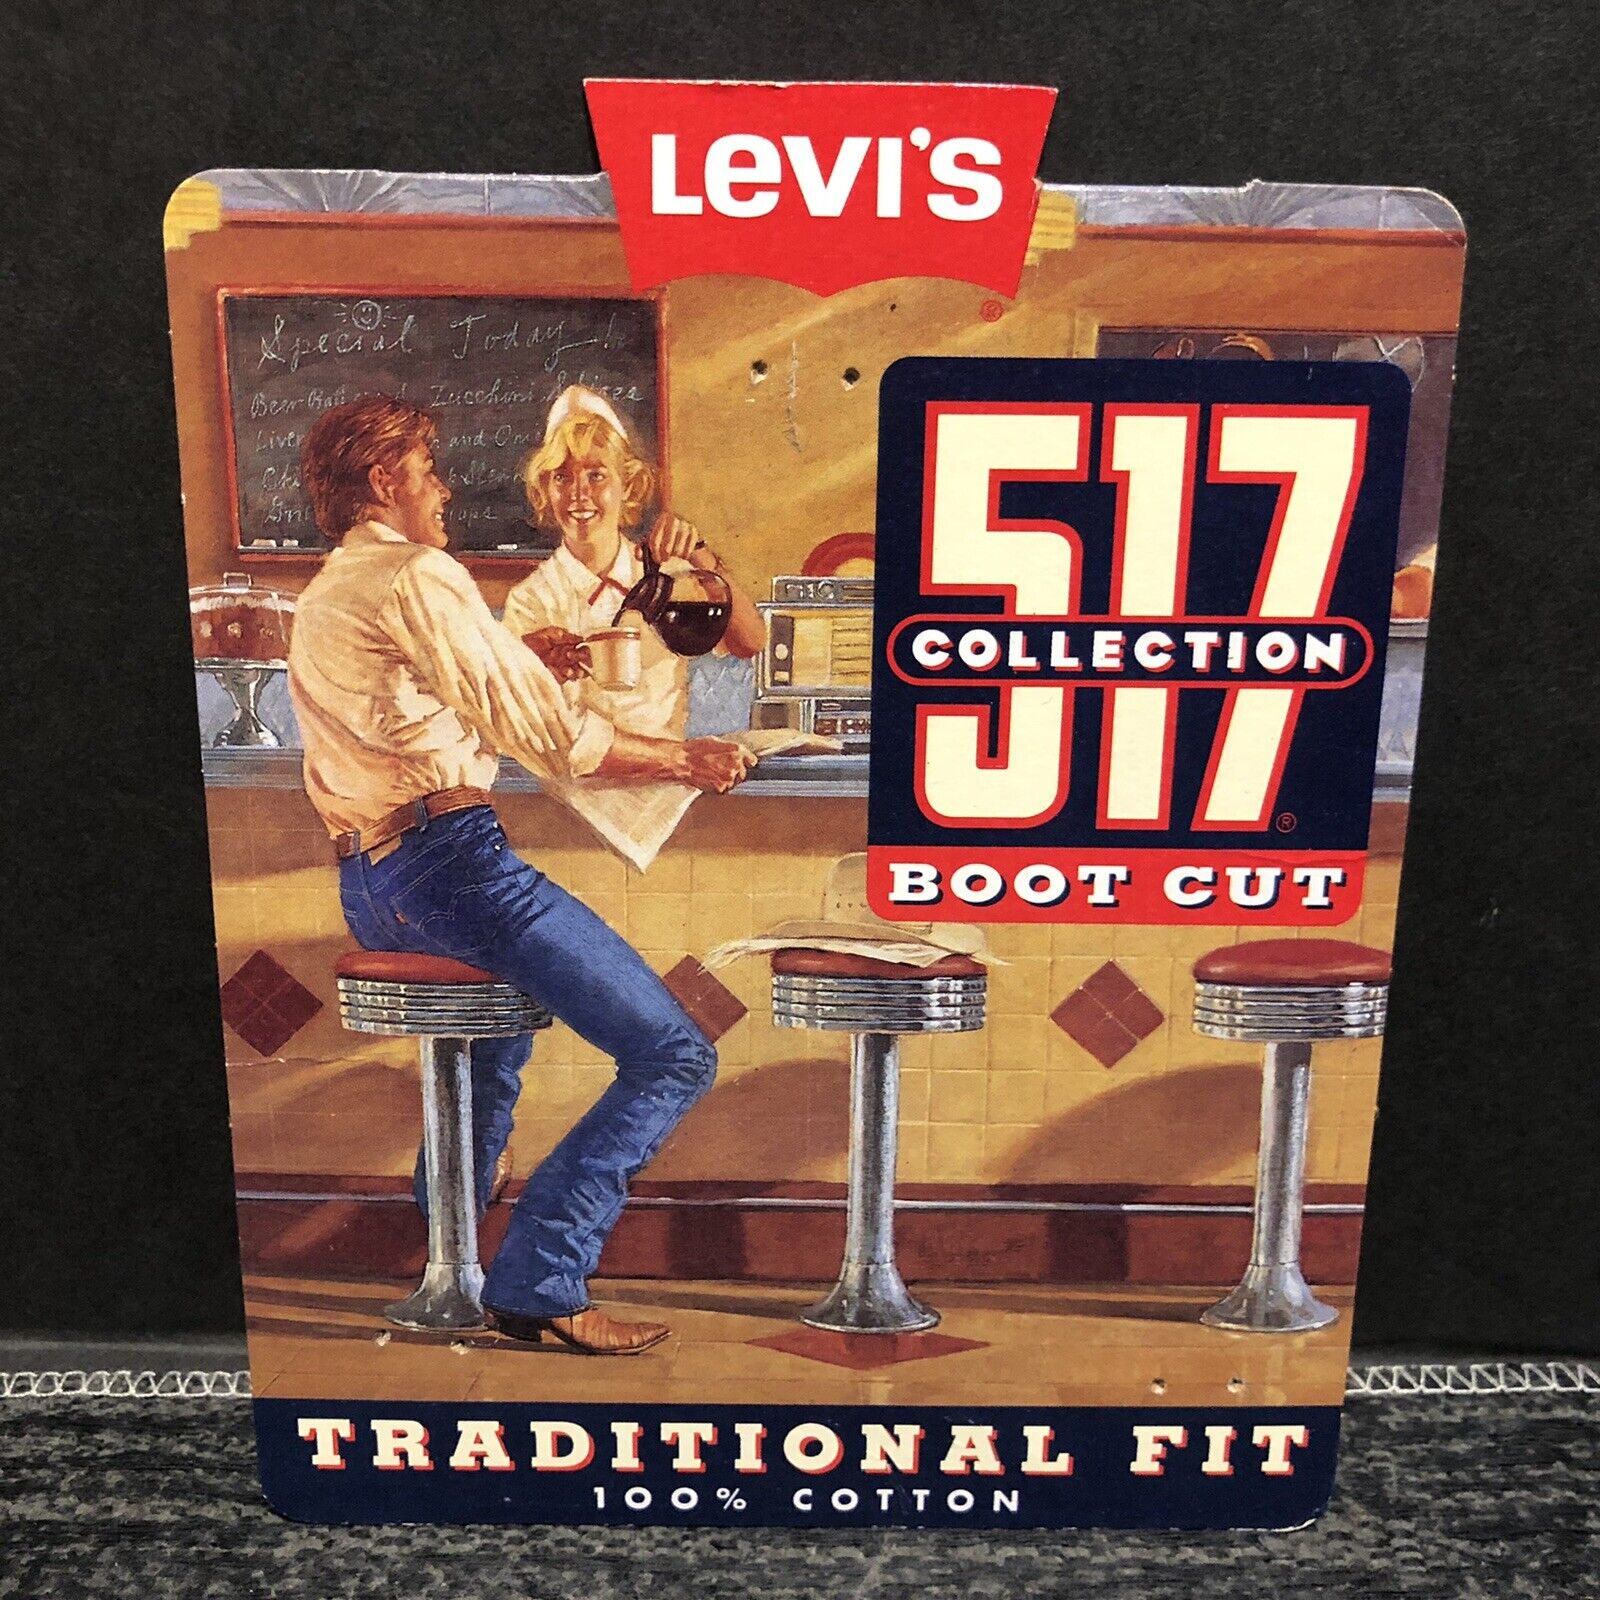 Levis 517 Collection Boot Cut Jeans Pocket Hangtag Advertising Diner Scene